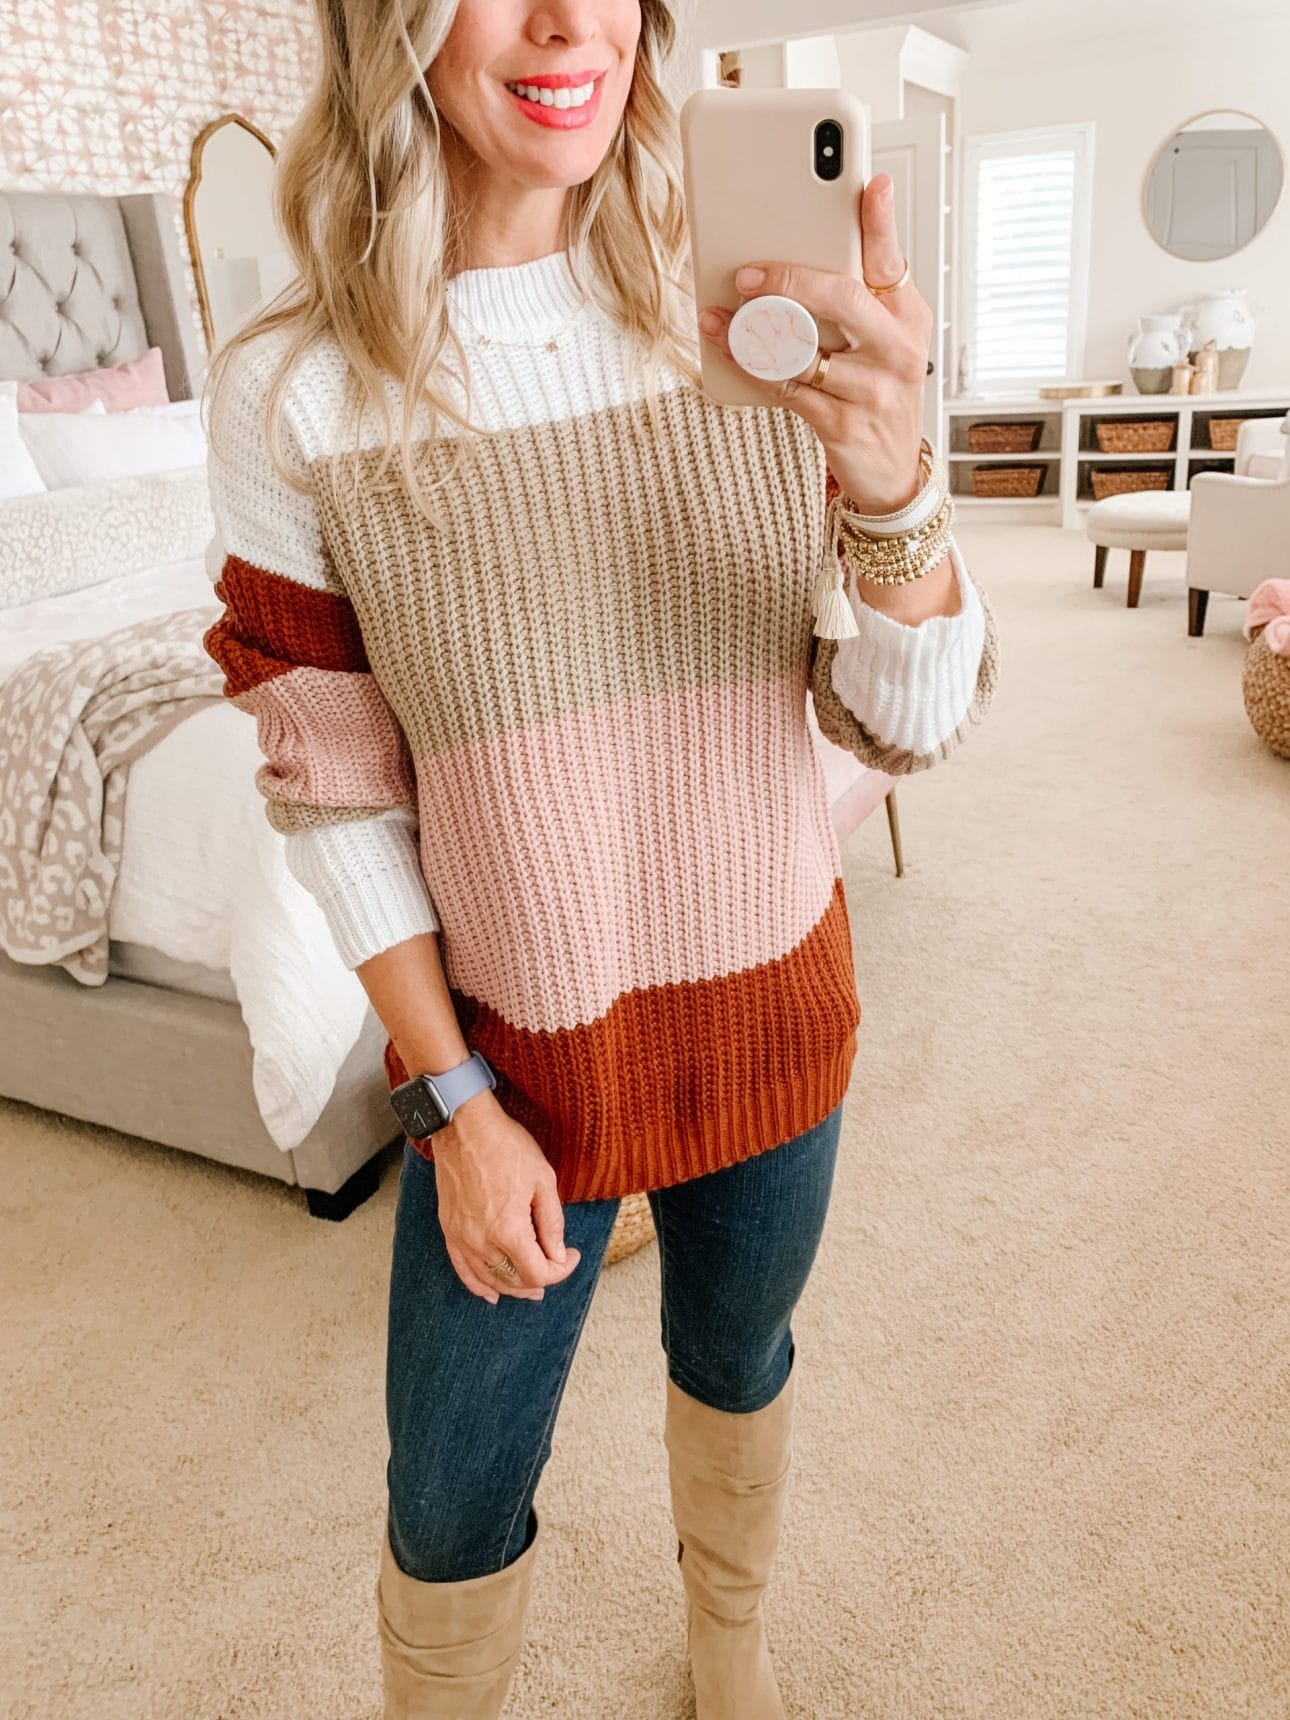 Amazon fashion, Colorblock Sweater, Jeans, Boots 